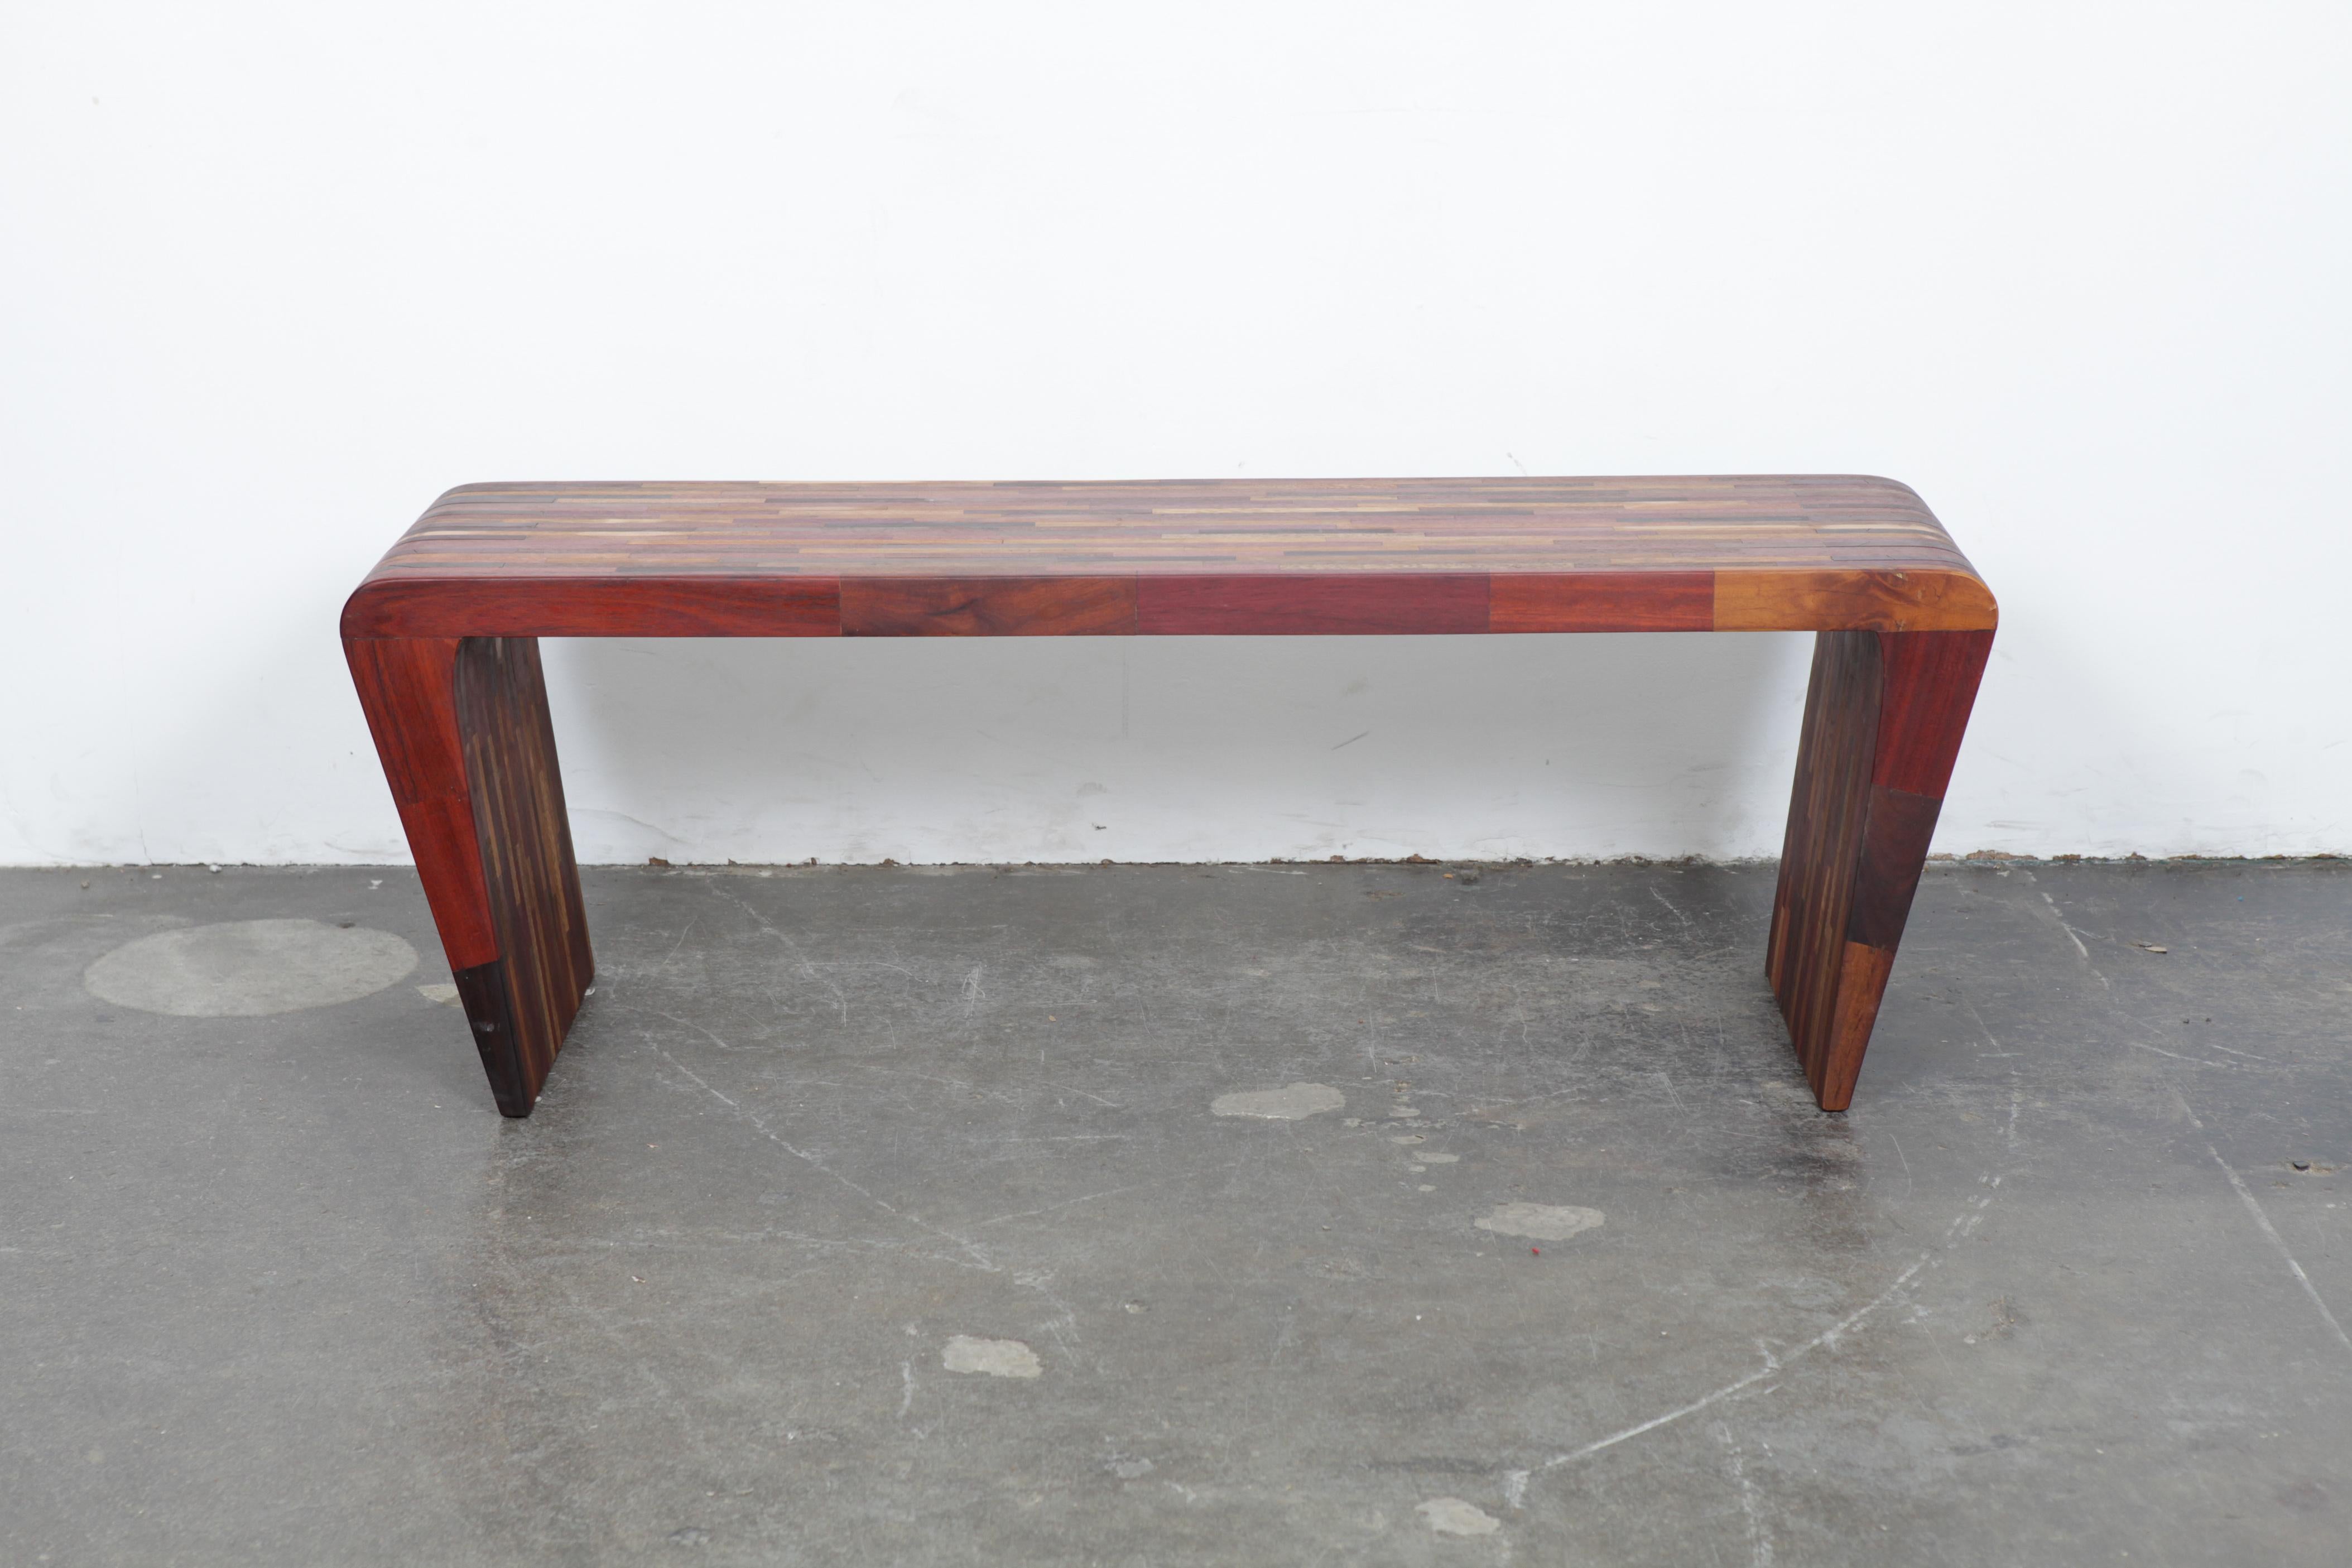 A one-of-a-kind sculptural solid Jatoba console table by artist Tunico T. Table has tapered, angled sides, made from naturally felled wood, Brazil, 2000s.